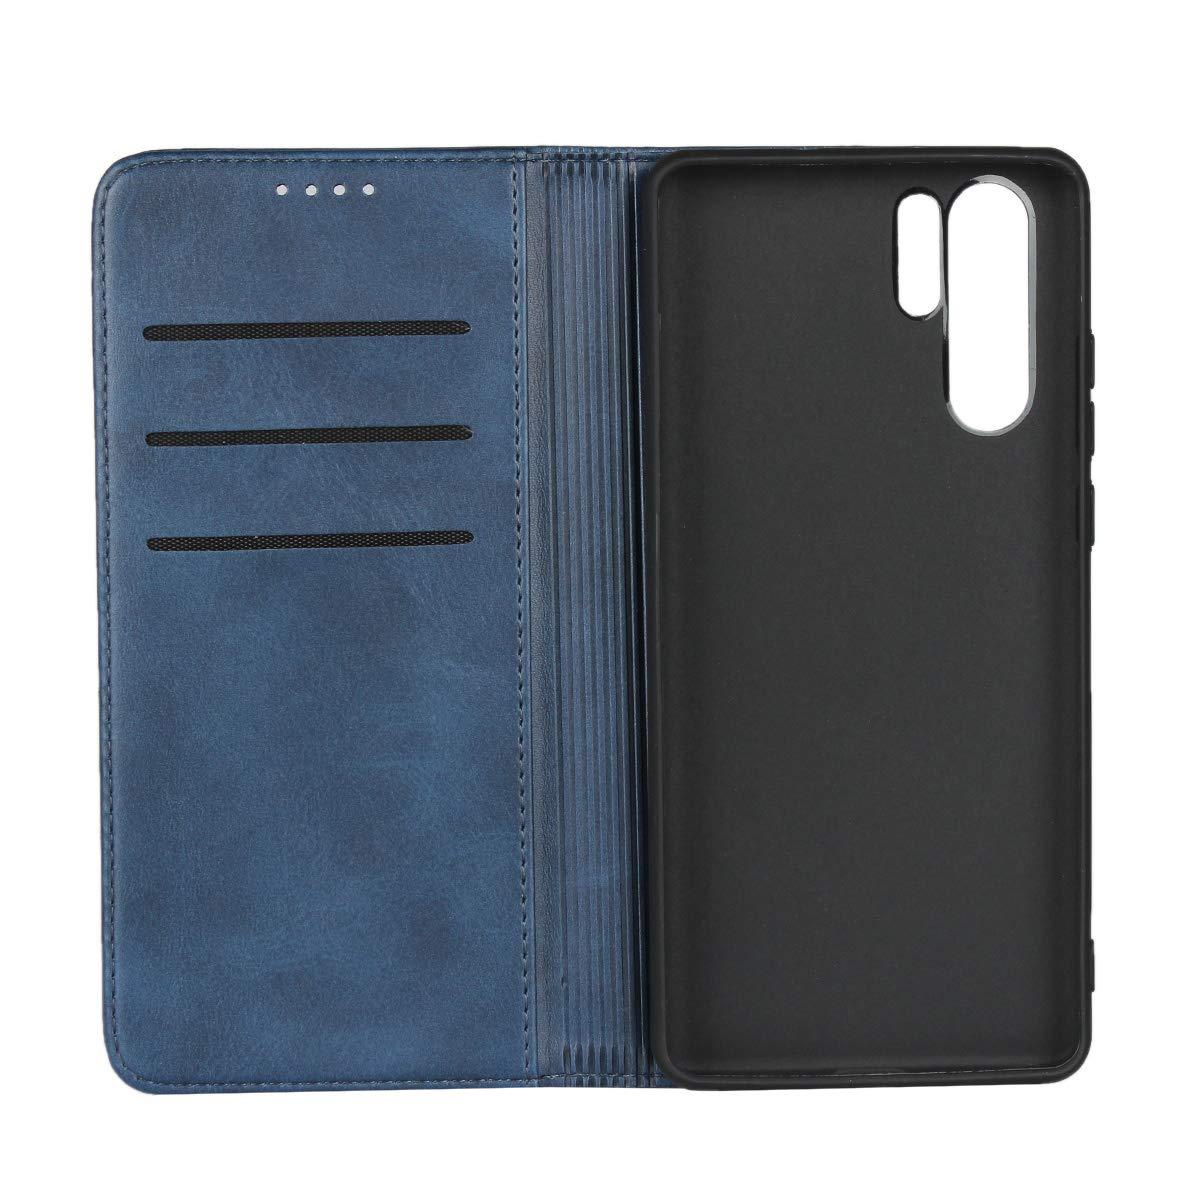 SailorTech Huawei P30 Pro Wallet Case, Premium PU Leather Case Flip Cases Folio Cover with Kickstand Card Slots Holder Strong Magnetic Closure Phone Case - Navy Blue 1